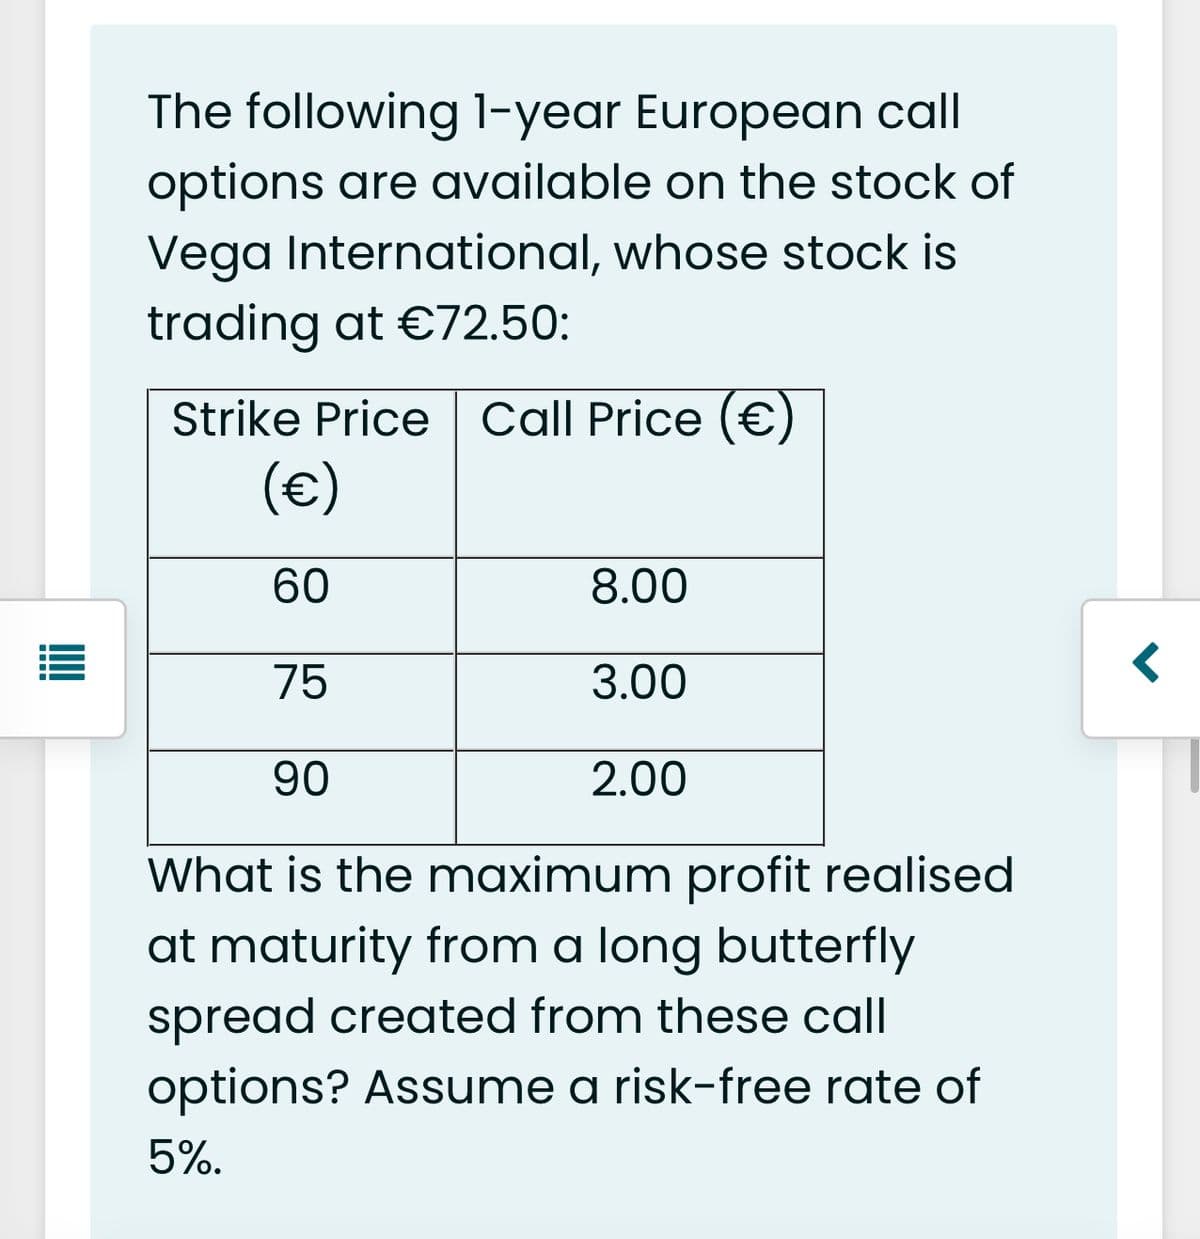 The following 1-year European call
options are available on the stock of
Vega International, whose stock is
trading at €72.50:
Strike Price Call Price (€)
(€)
60
8.00
75
3.00
90
2.00
What is the maximum profit realised
at maturity from a long butterfly
spread created from these call
options? Assume a risk-free rate of
5%.